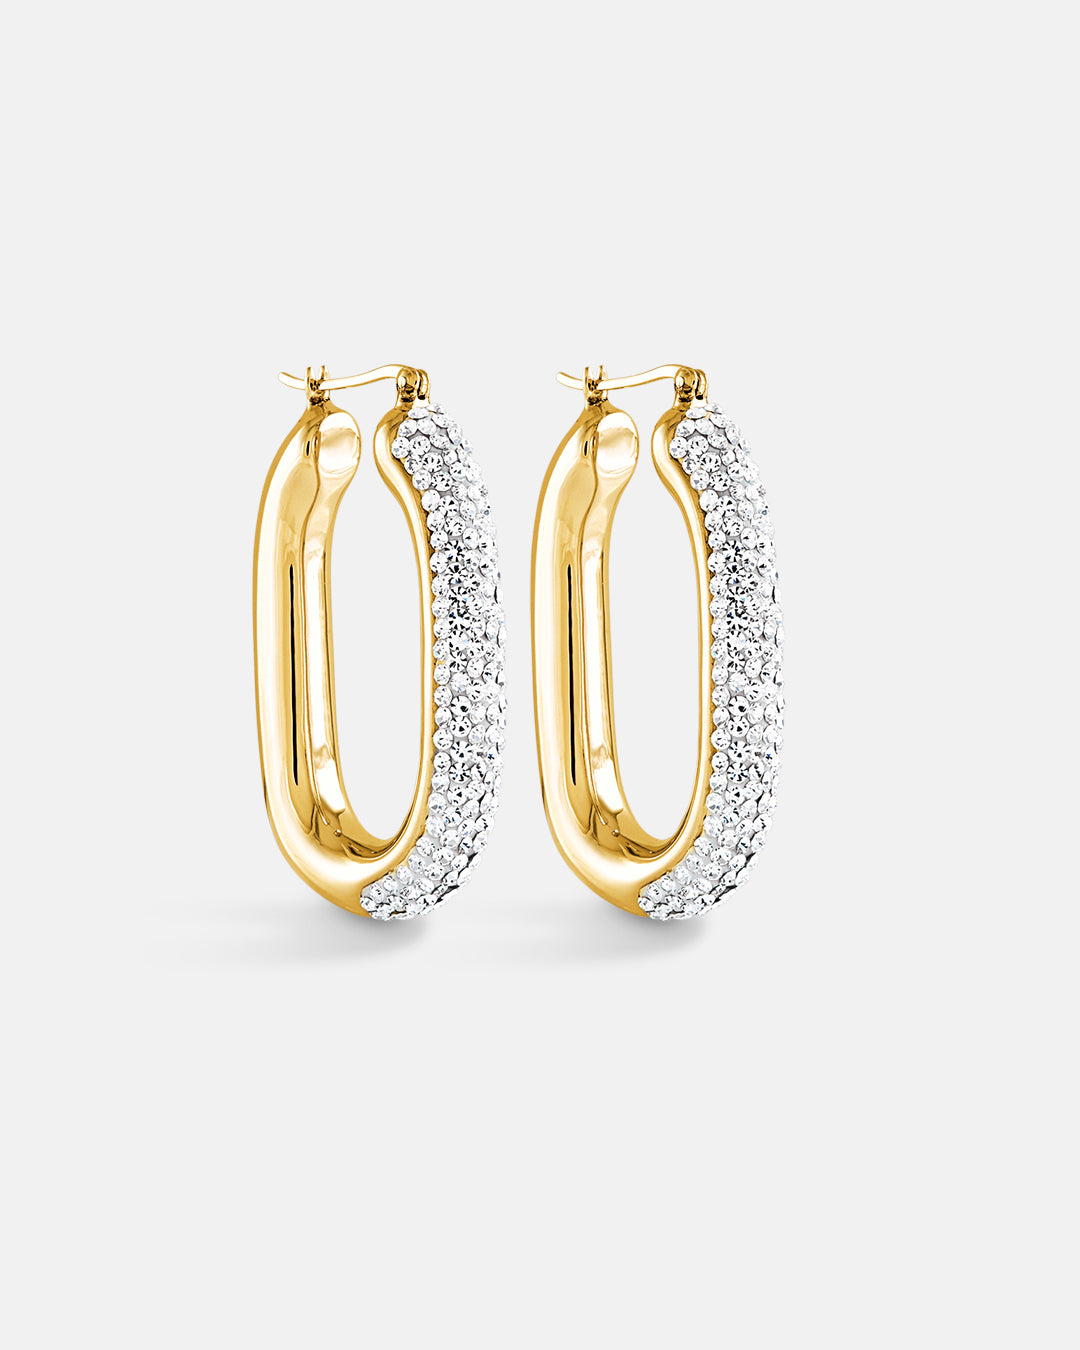 This is the product picture of elegant hoop earrings with micro pavé crystals plated in gold in sterling silver material